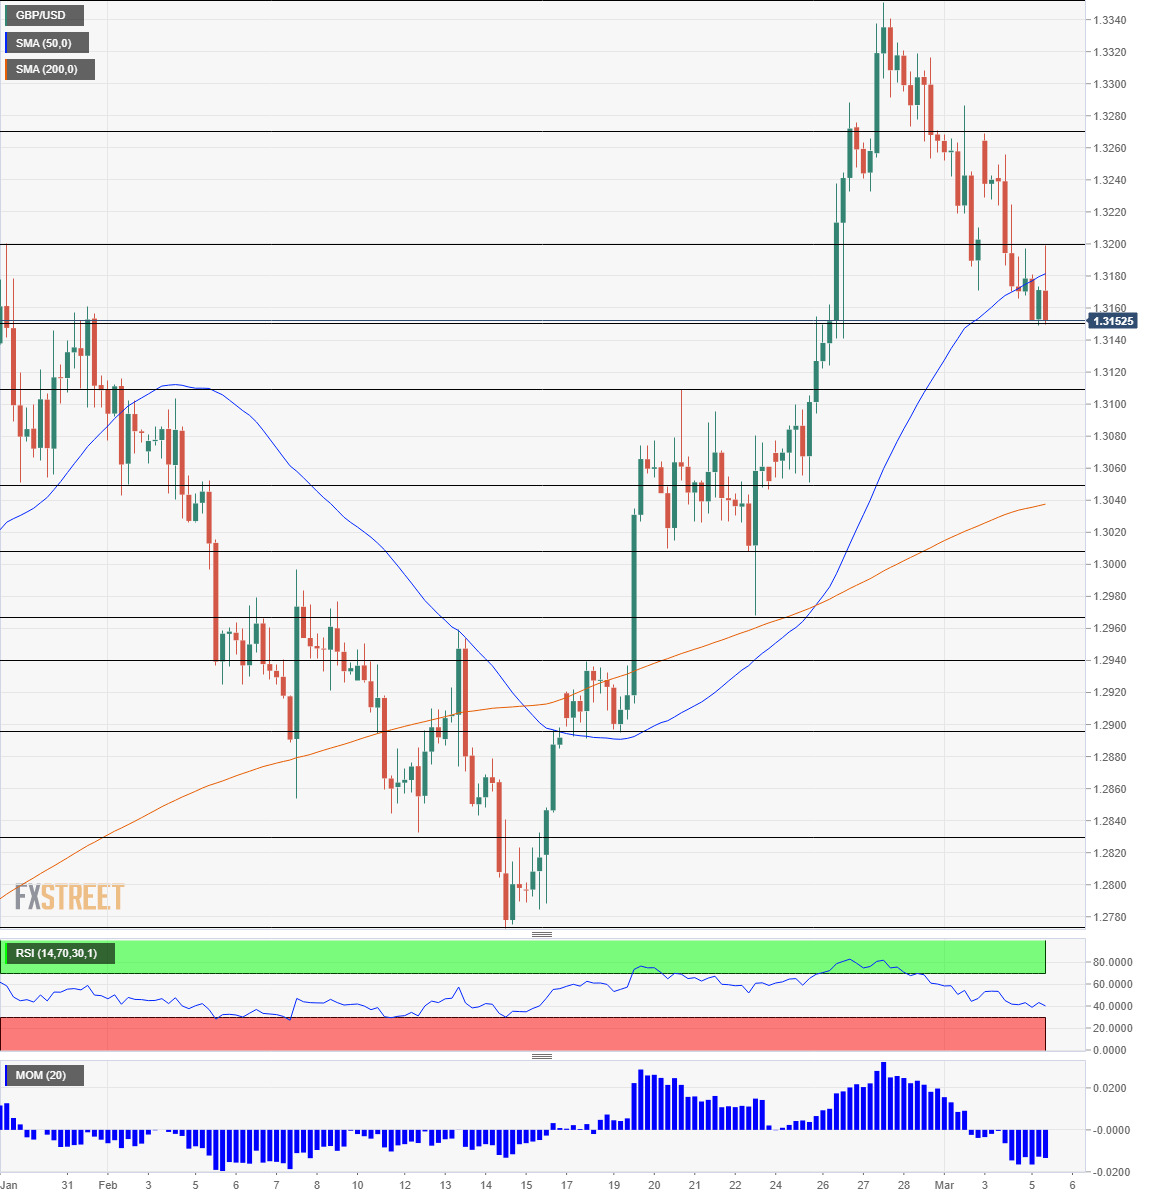 GBP USD Technical analysis chart March 5 2019